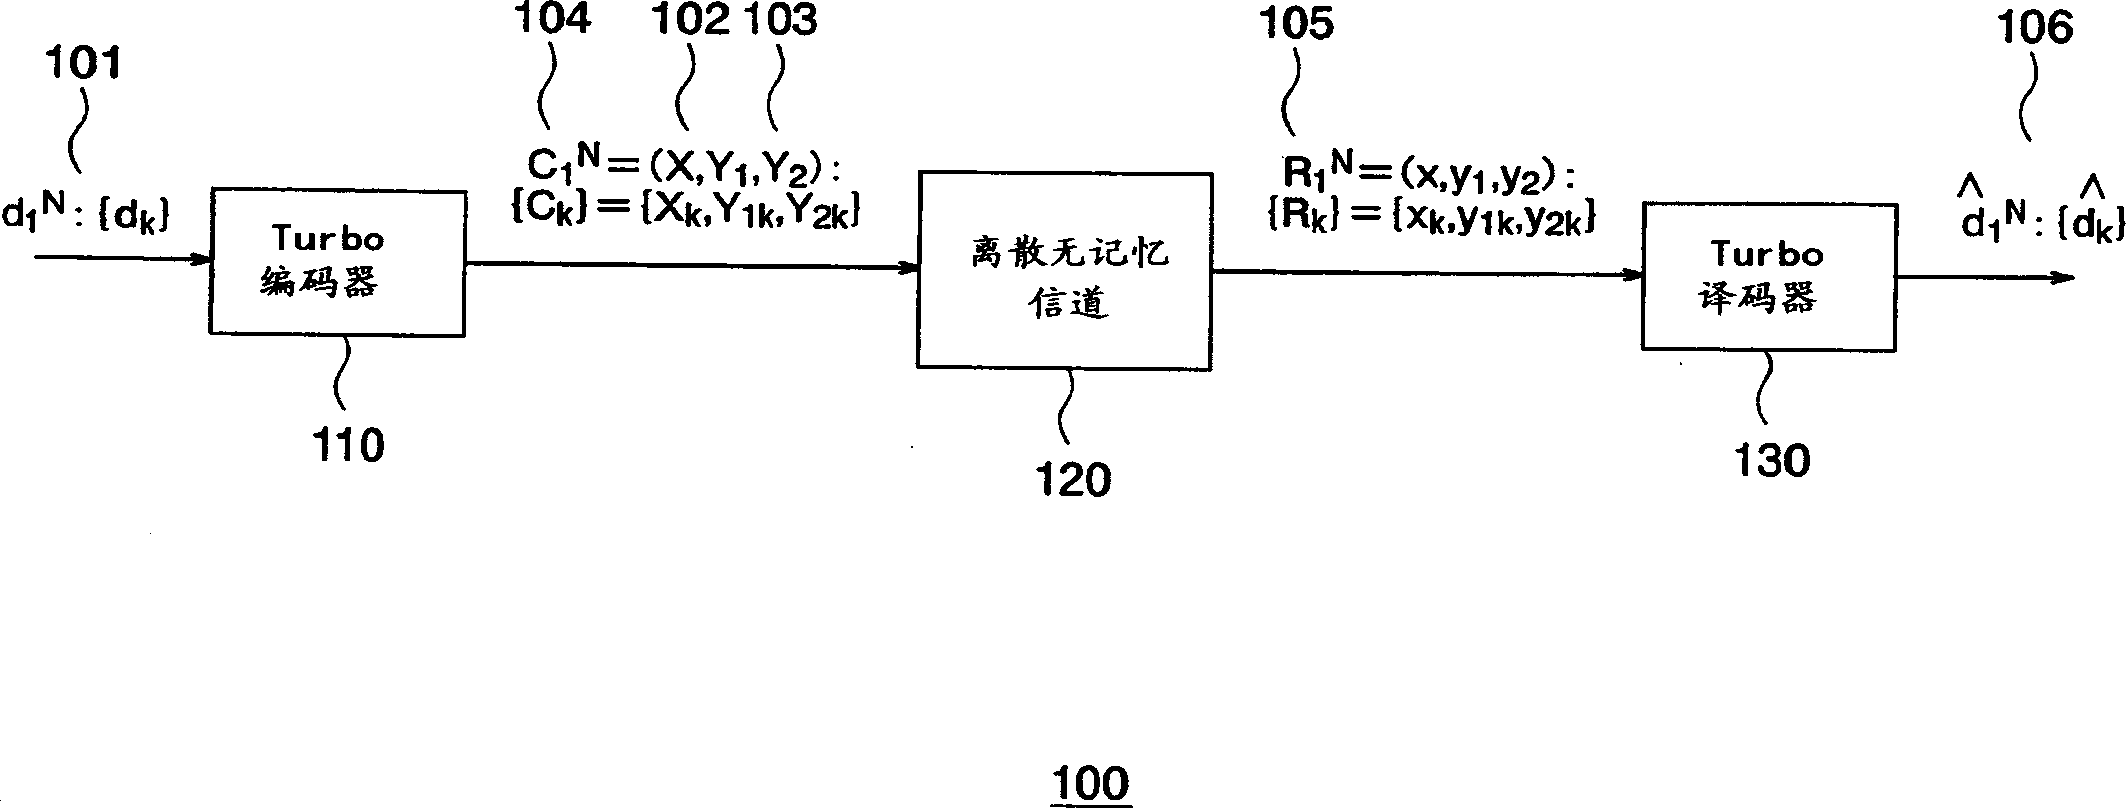 Method and apparatus for decoding turbo-encoded code sequence